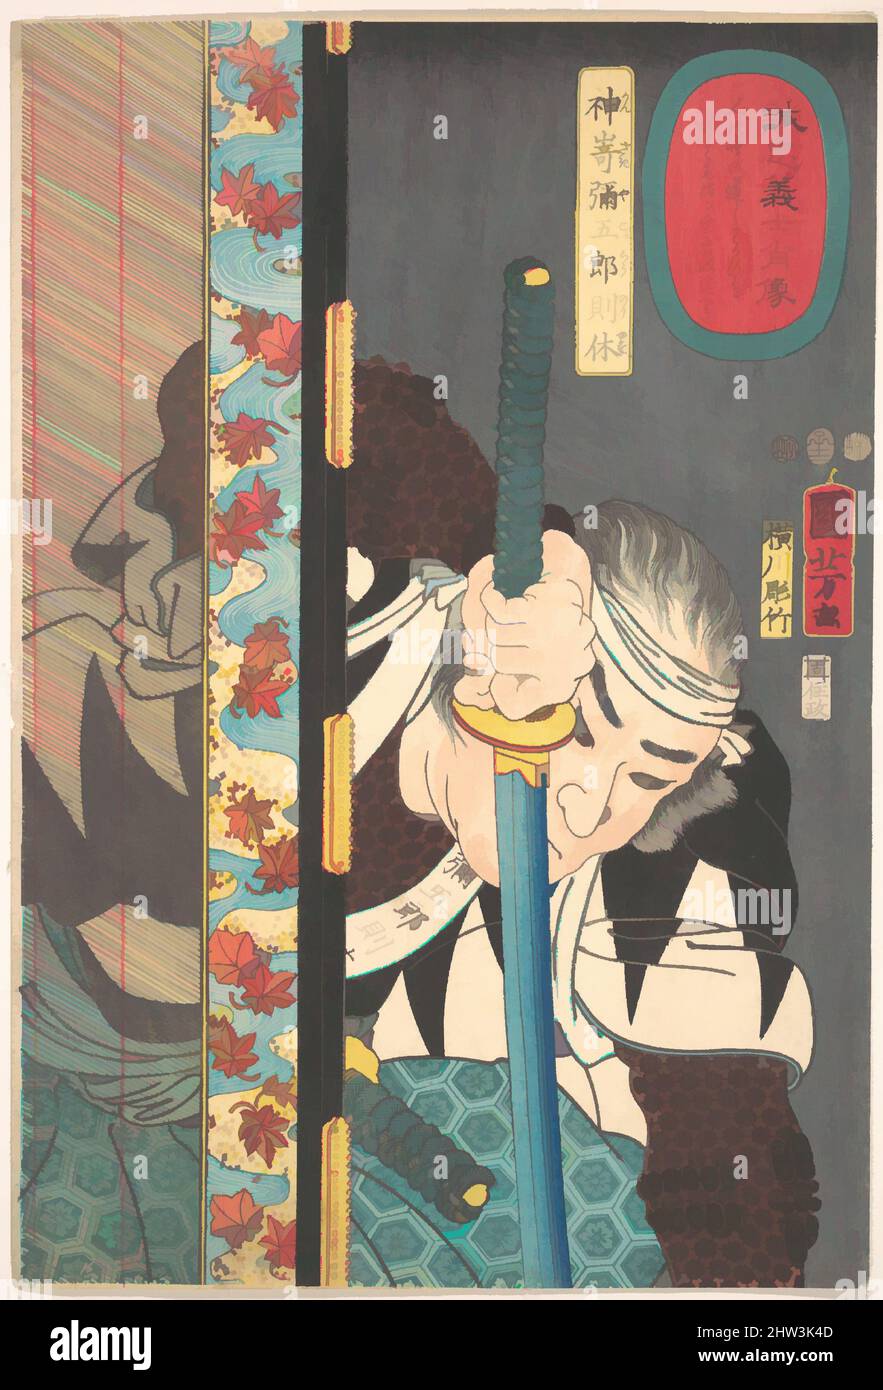 Art inspired by Portrait of Kansake Yagoro Noriyasu, Edo period (1615–1868), 1852, Japan, Polychrome woodblock print; ink and color on paper, H. 14 5/8 in. (37.1 cm); W. 9 7/8 in. (25.1 cm), Prints, Utagawa Kuniyoshi (Japanese, 1797–1861, Classic works modernized by Artotop with a splash of modernity. Shapes, color and value, eye-catching visual impact on art. Emotions through freedom of artworks in a contemporary way. A timeless message pursuing a wildly creative new direction. Artists turning to the digital medium and creating the Artotop NFT Stock Photo